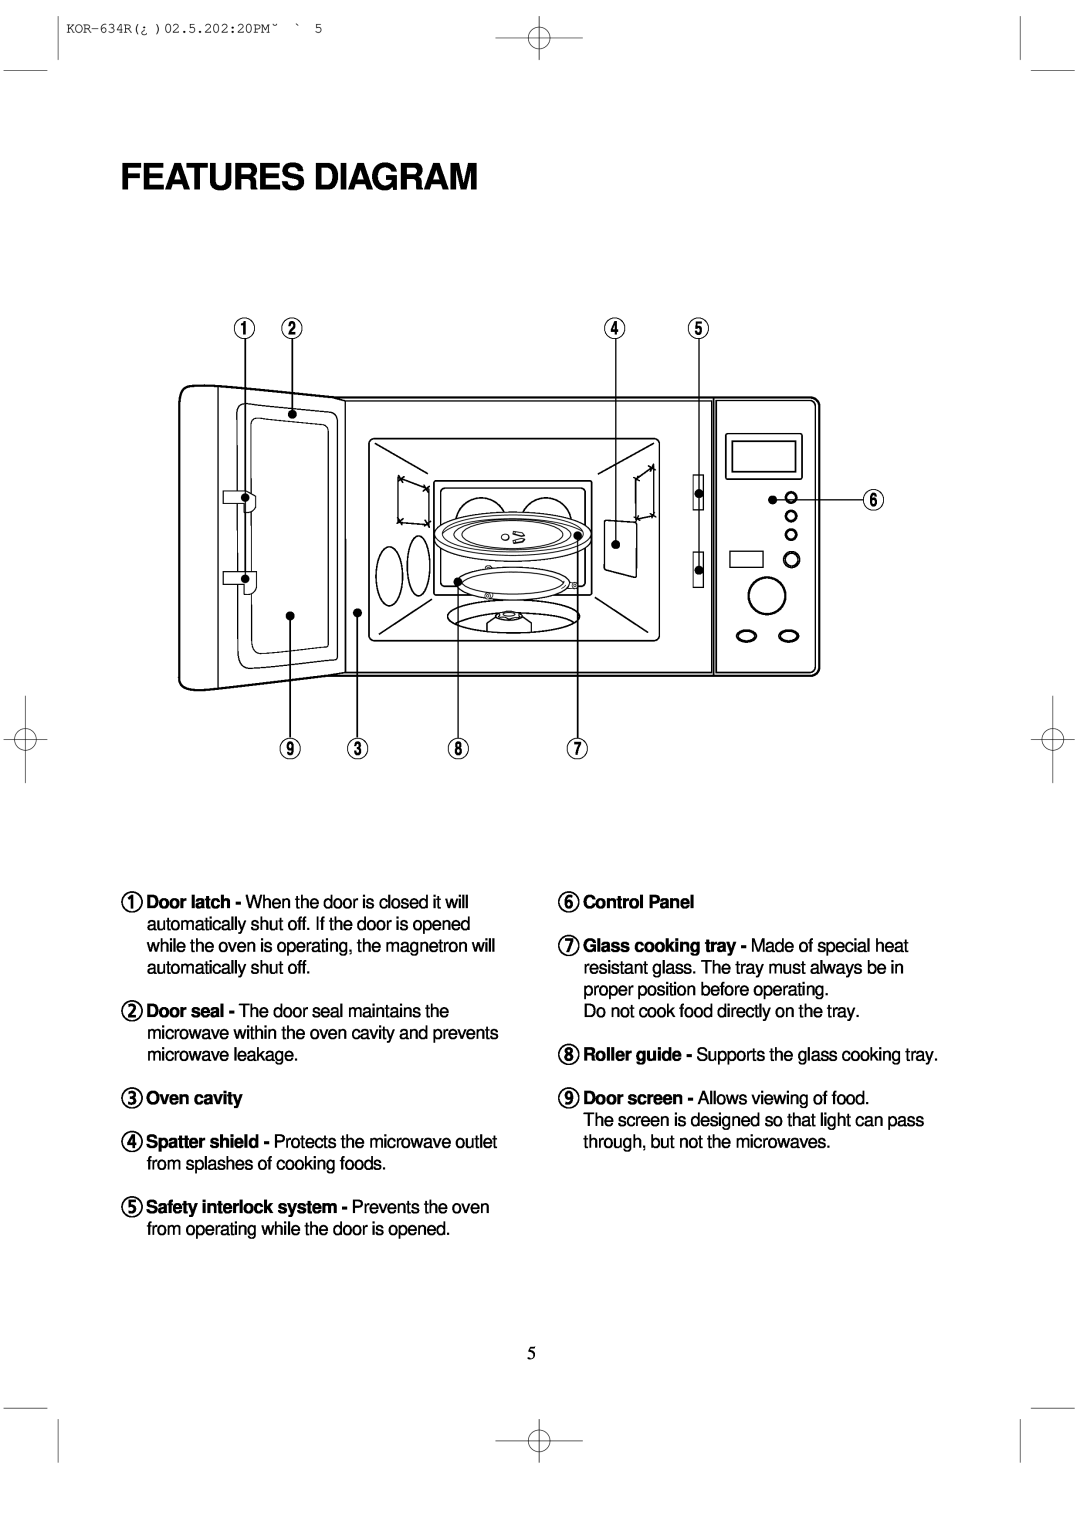 Daewoo KOR-634R operating instructions Features Diagram, 6 9, 3Oven cavity, 6Control Panel 